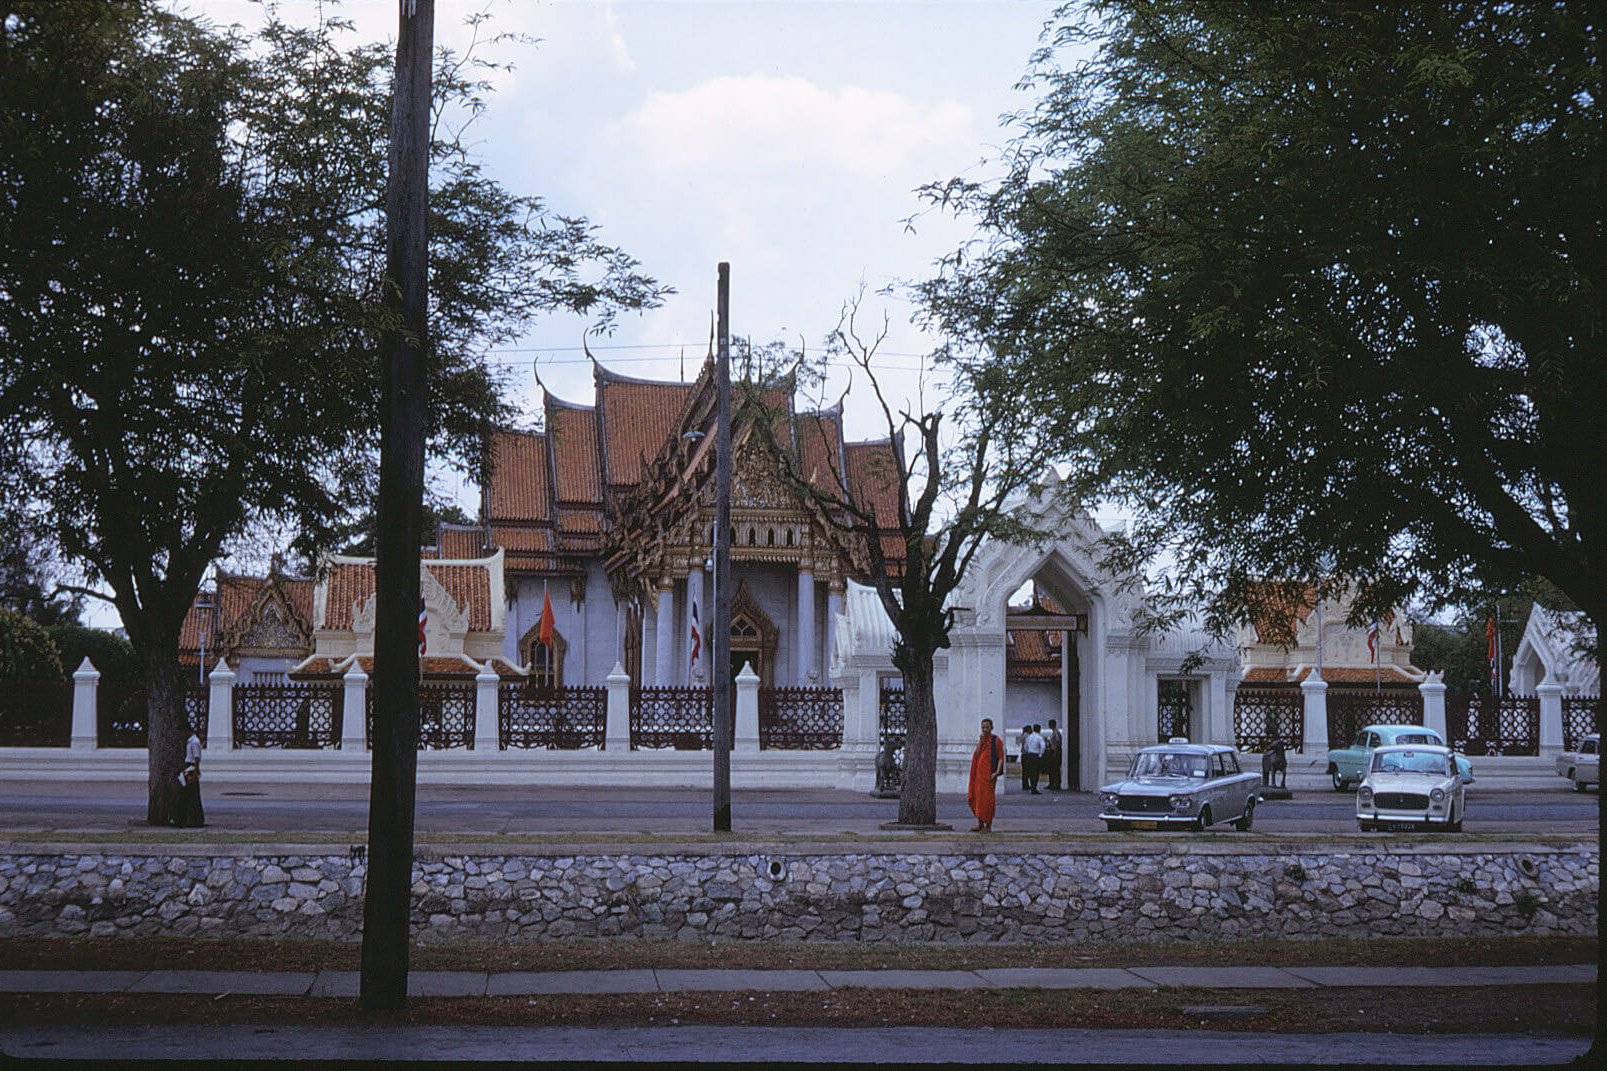 An ornate Asian temple with a monk in orange standing outside.